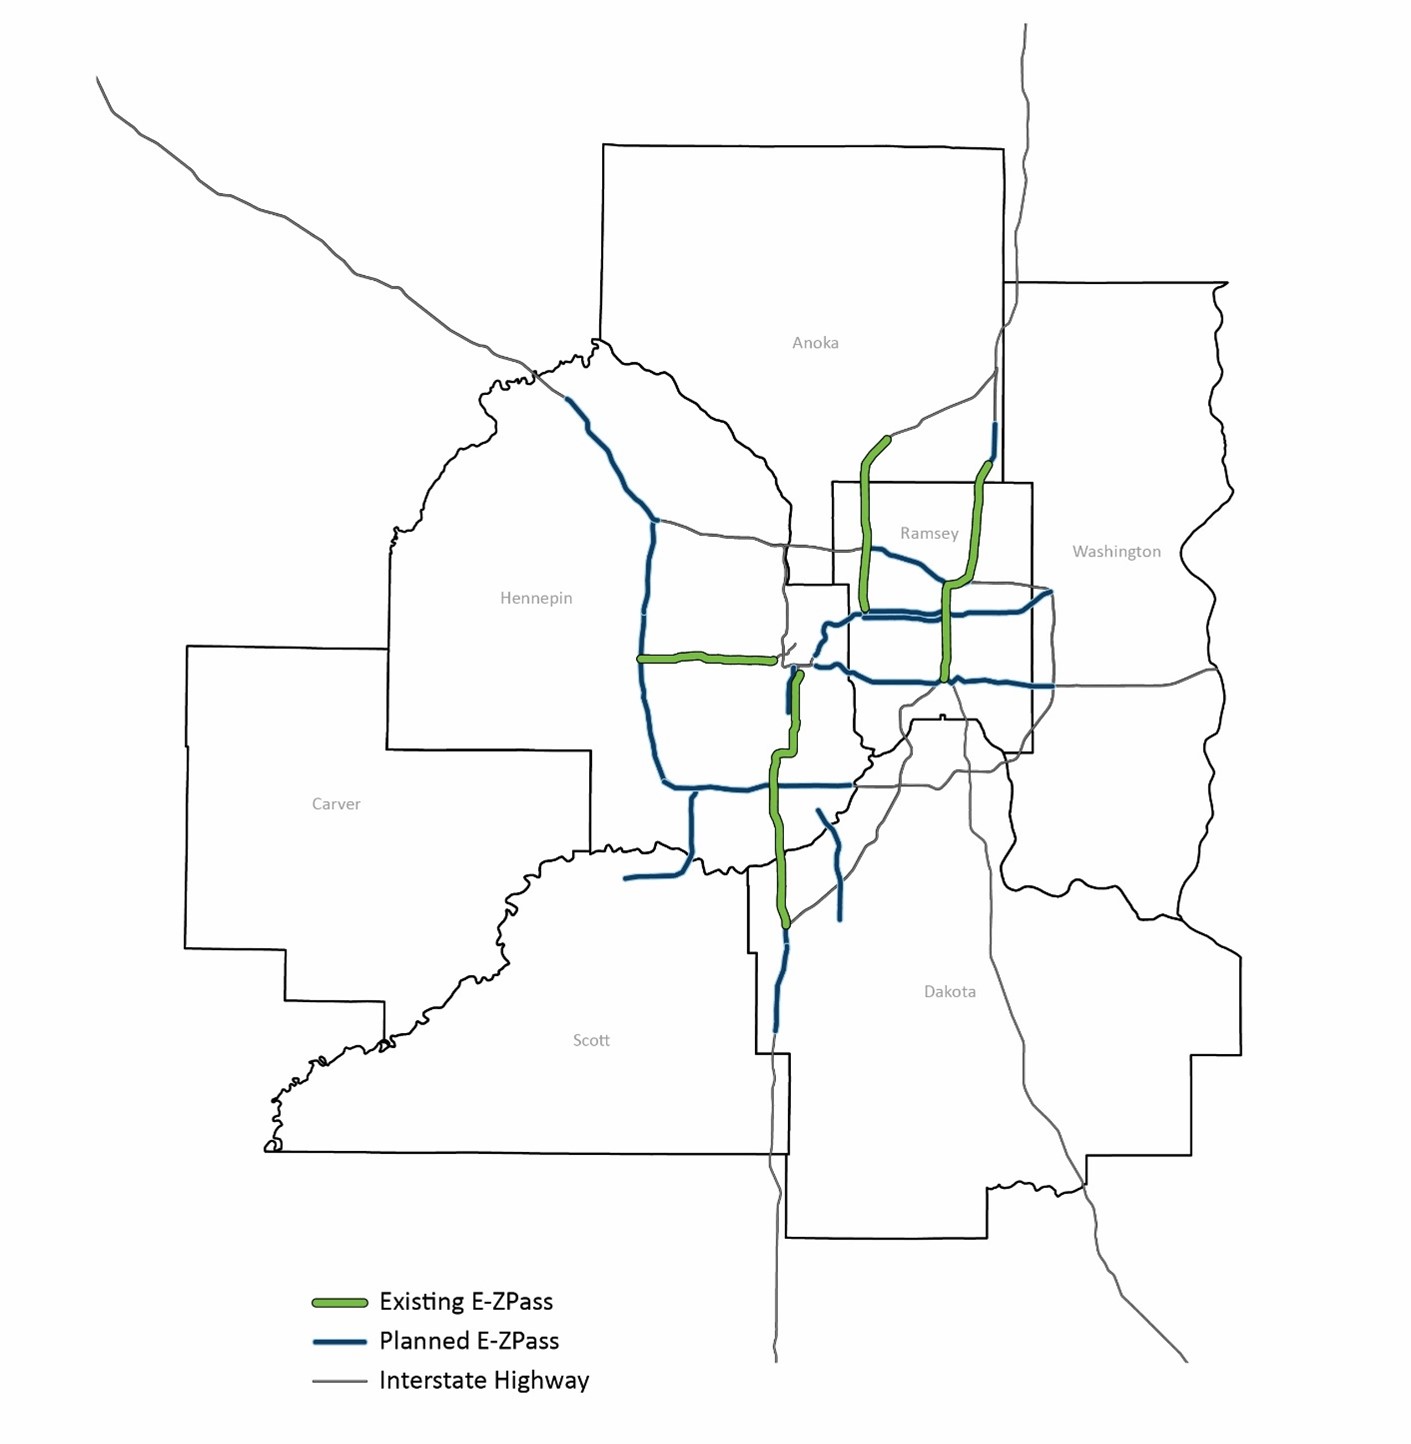 Map of Twin Cities metro area that shows location of existing E-ZPass lane corridors, planned E-ZPass lane corridors and interstate highways.